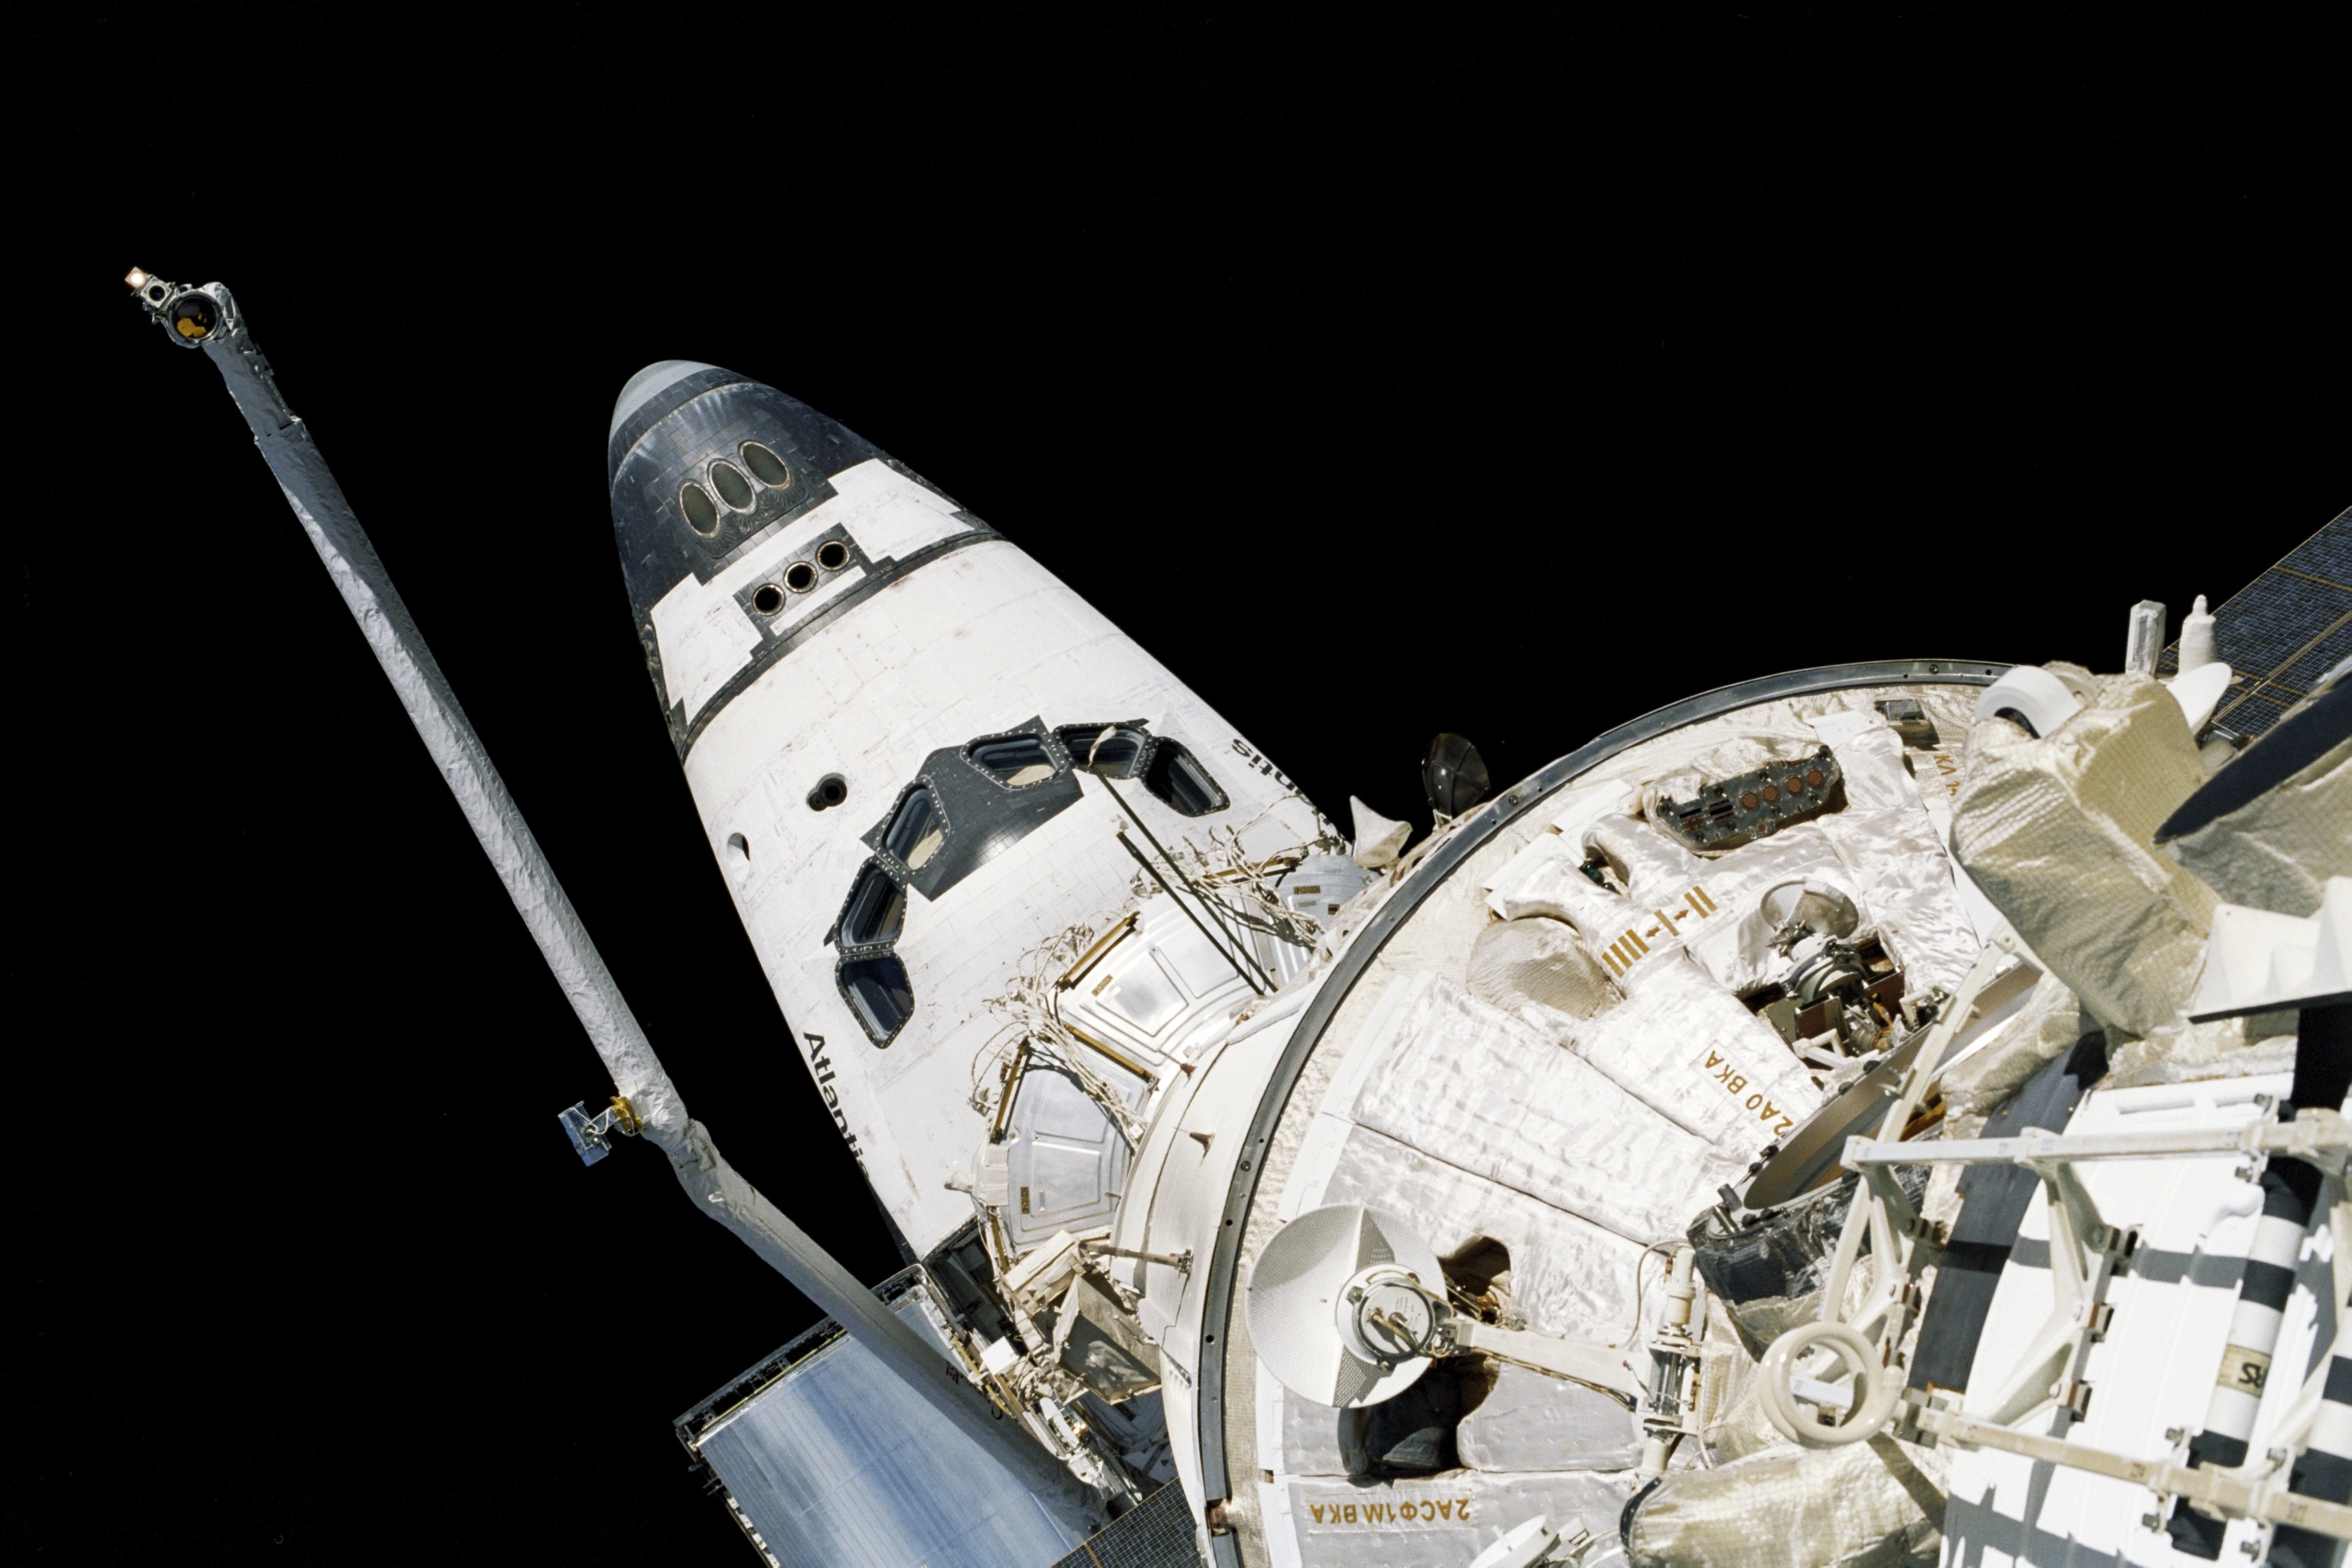 Impressive view of Atlantis and part of the International Space Station (ISS), captured during the STS-106 mission, 15 years ago, this week. Photo Credit: NASA